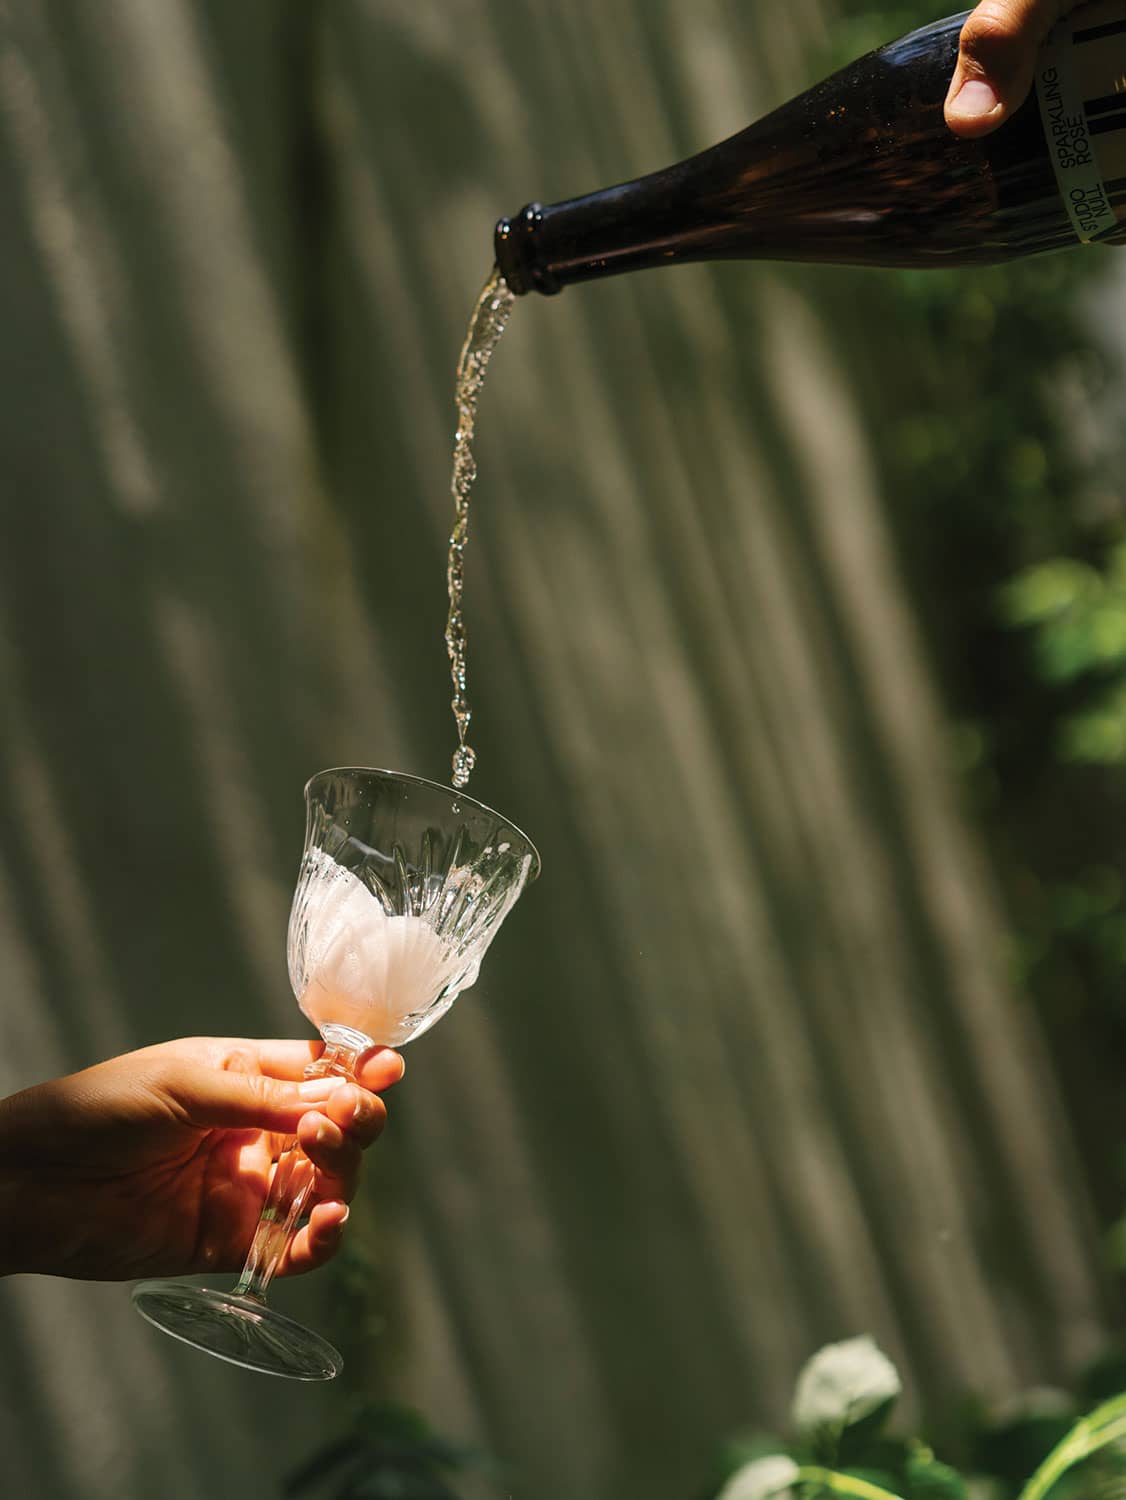 Pouring nonalcoholic wine